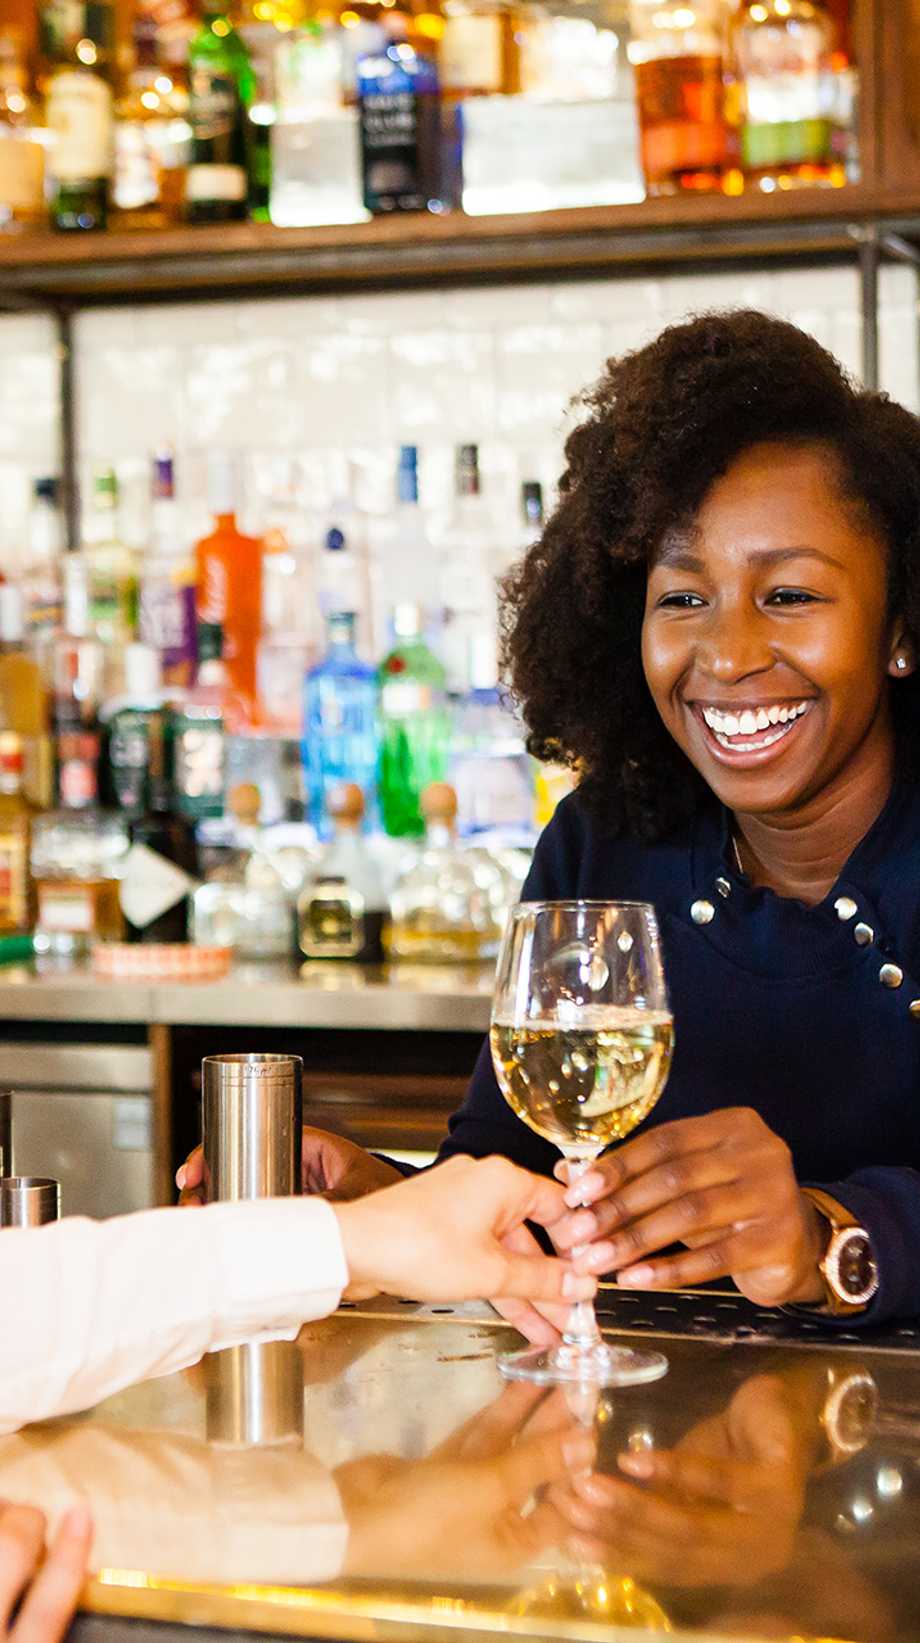 A team member hands a glass of white wine to a guest while smiling.